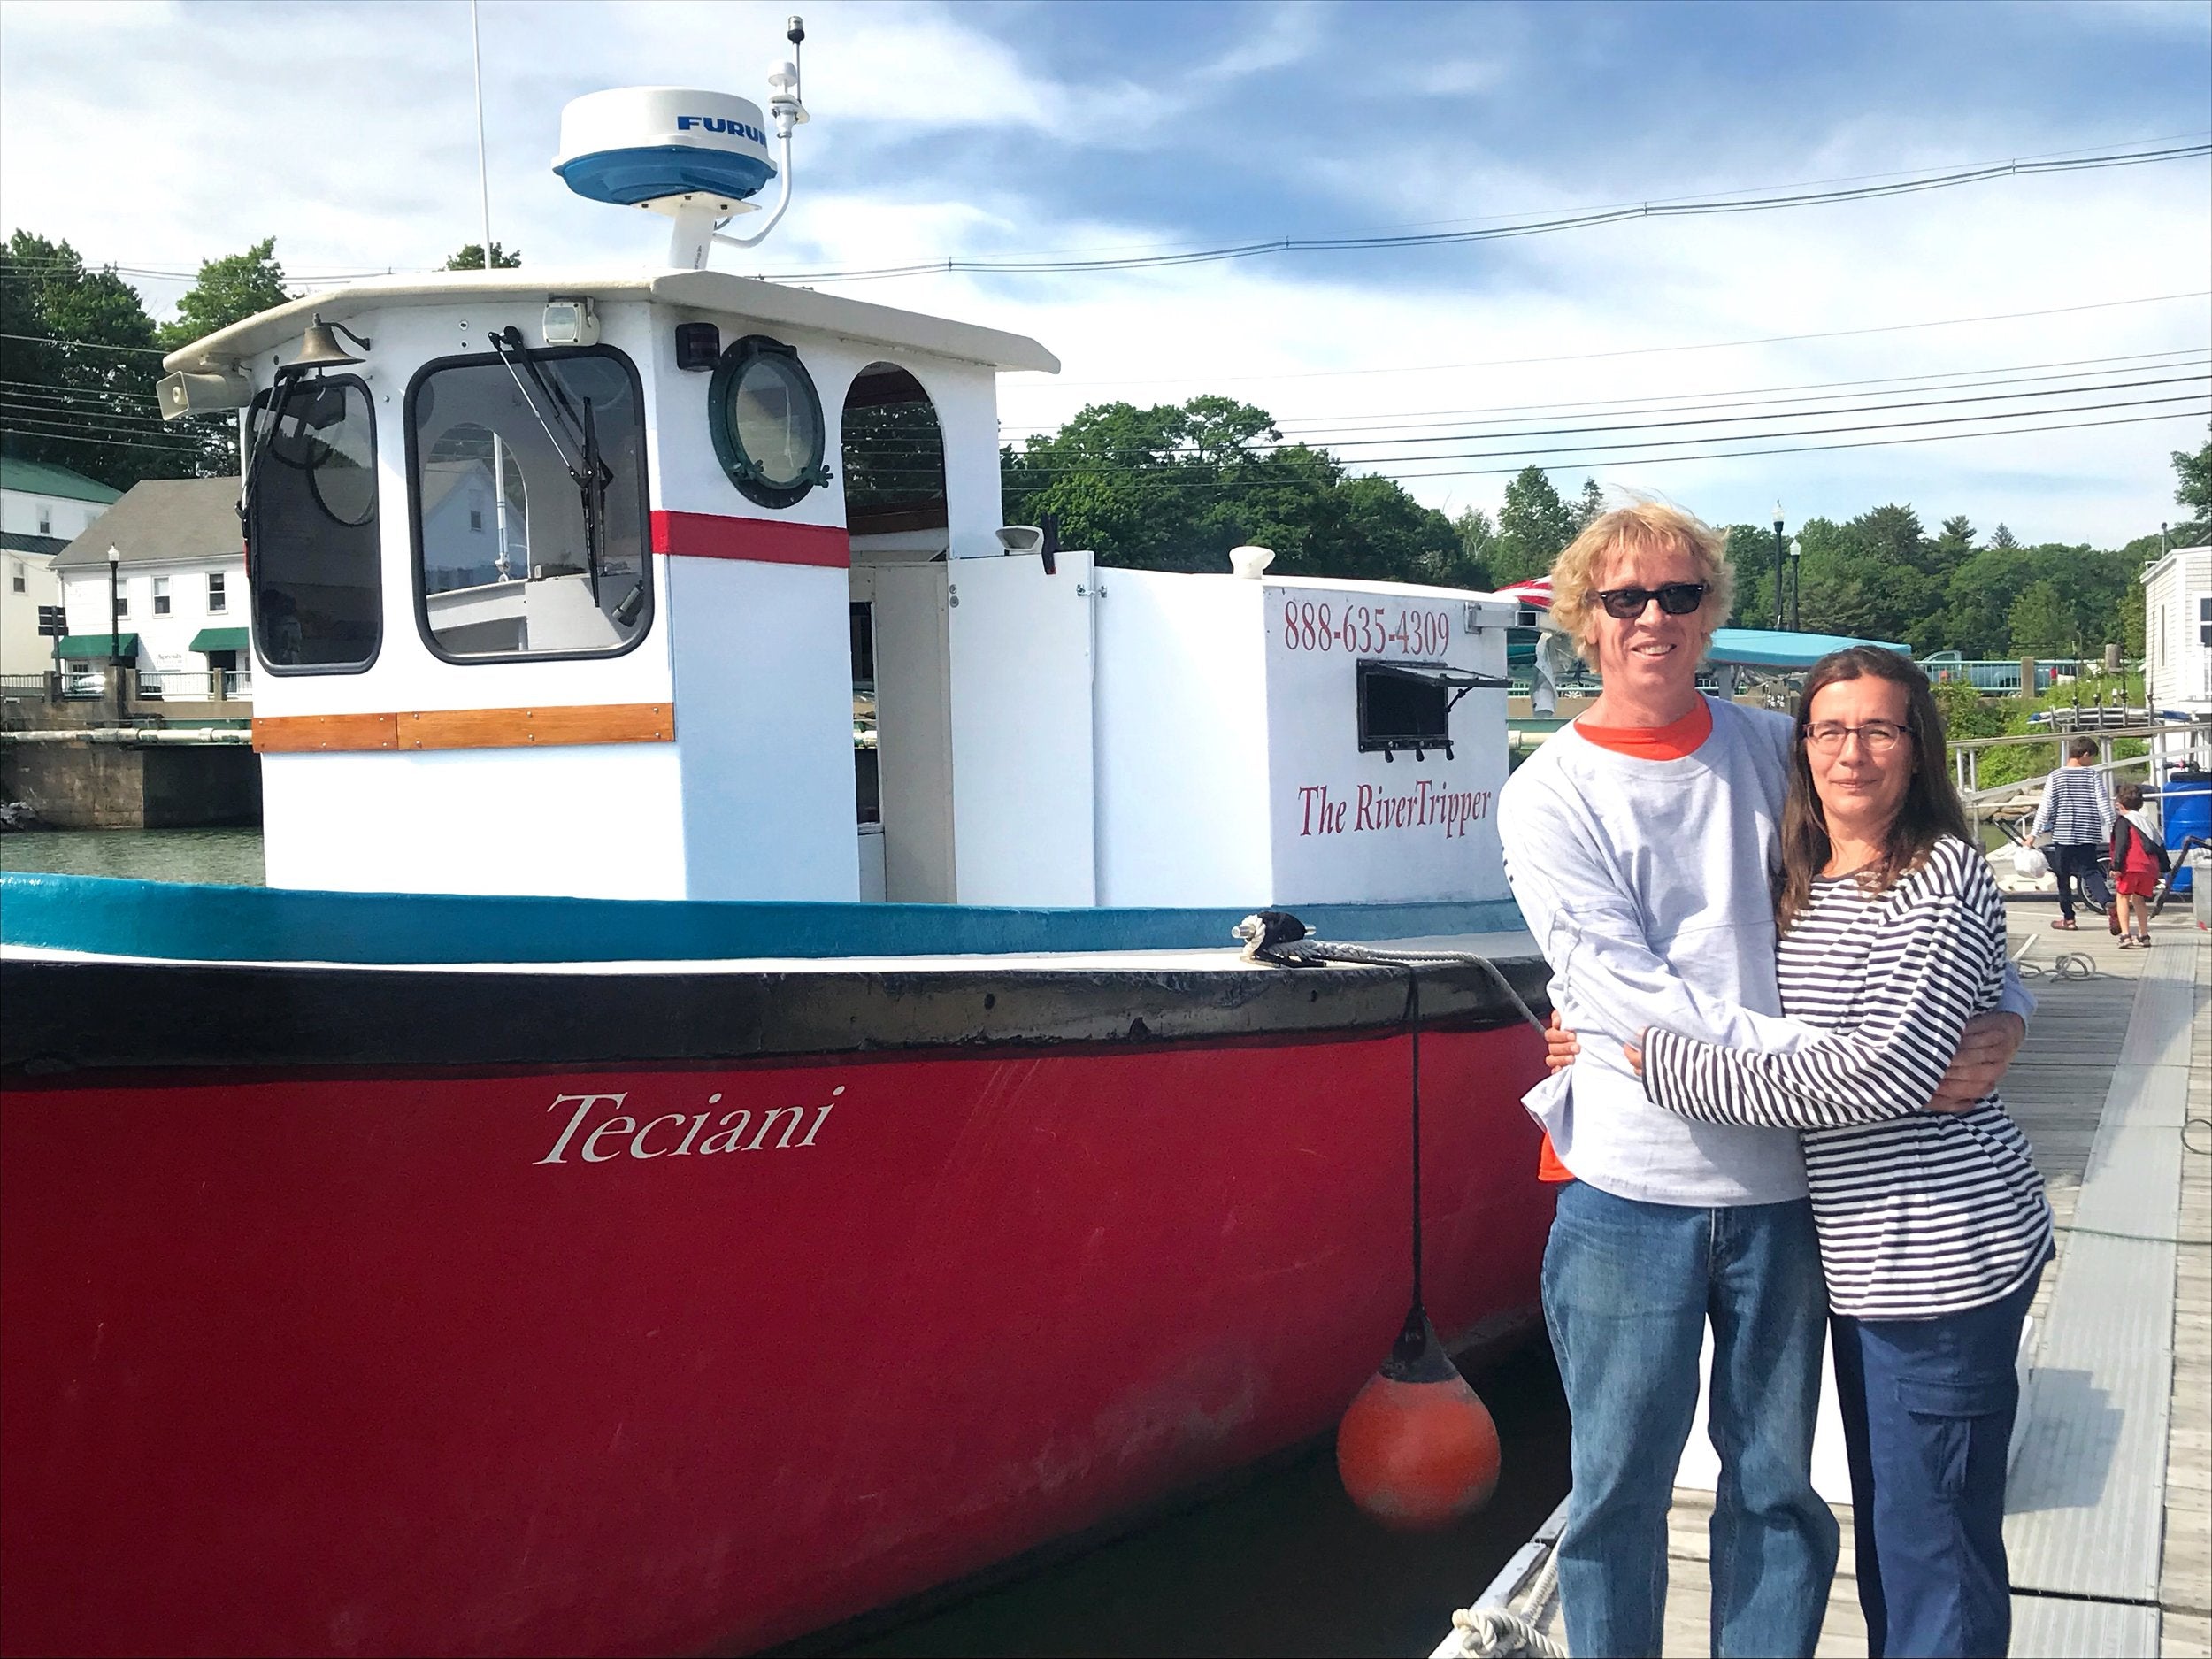 The Damariscotta River Cruise: A Backstage Pass to Maine's Precious Oyster Farms